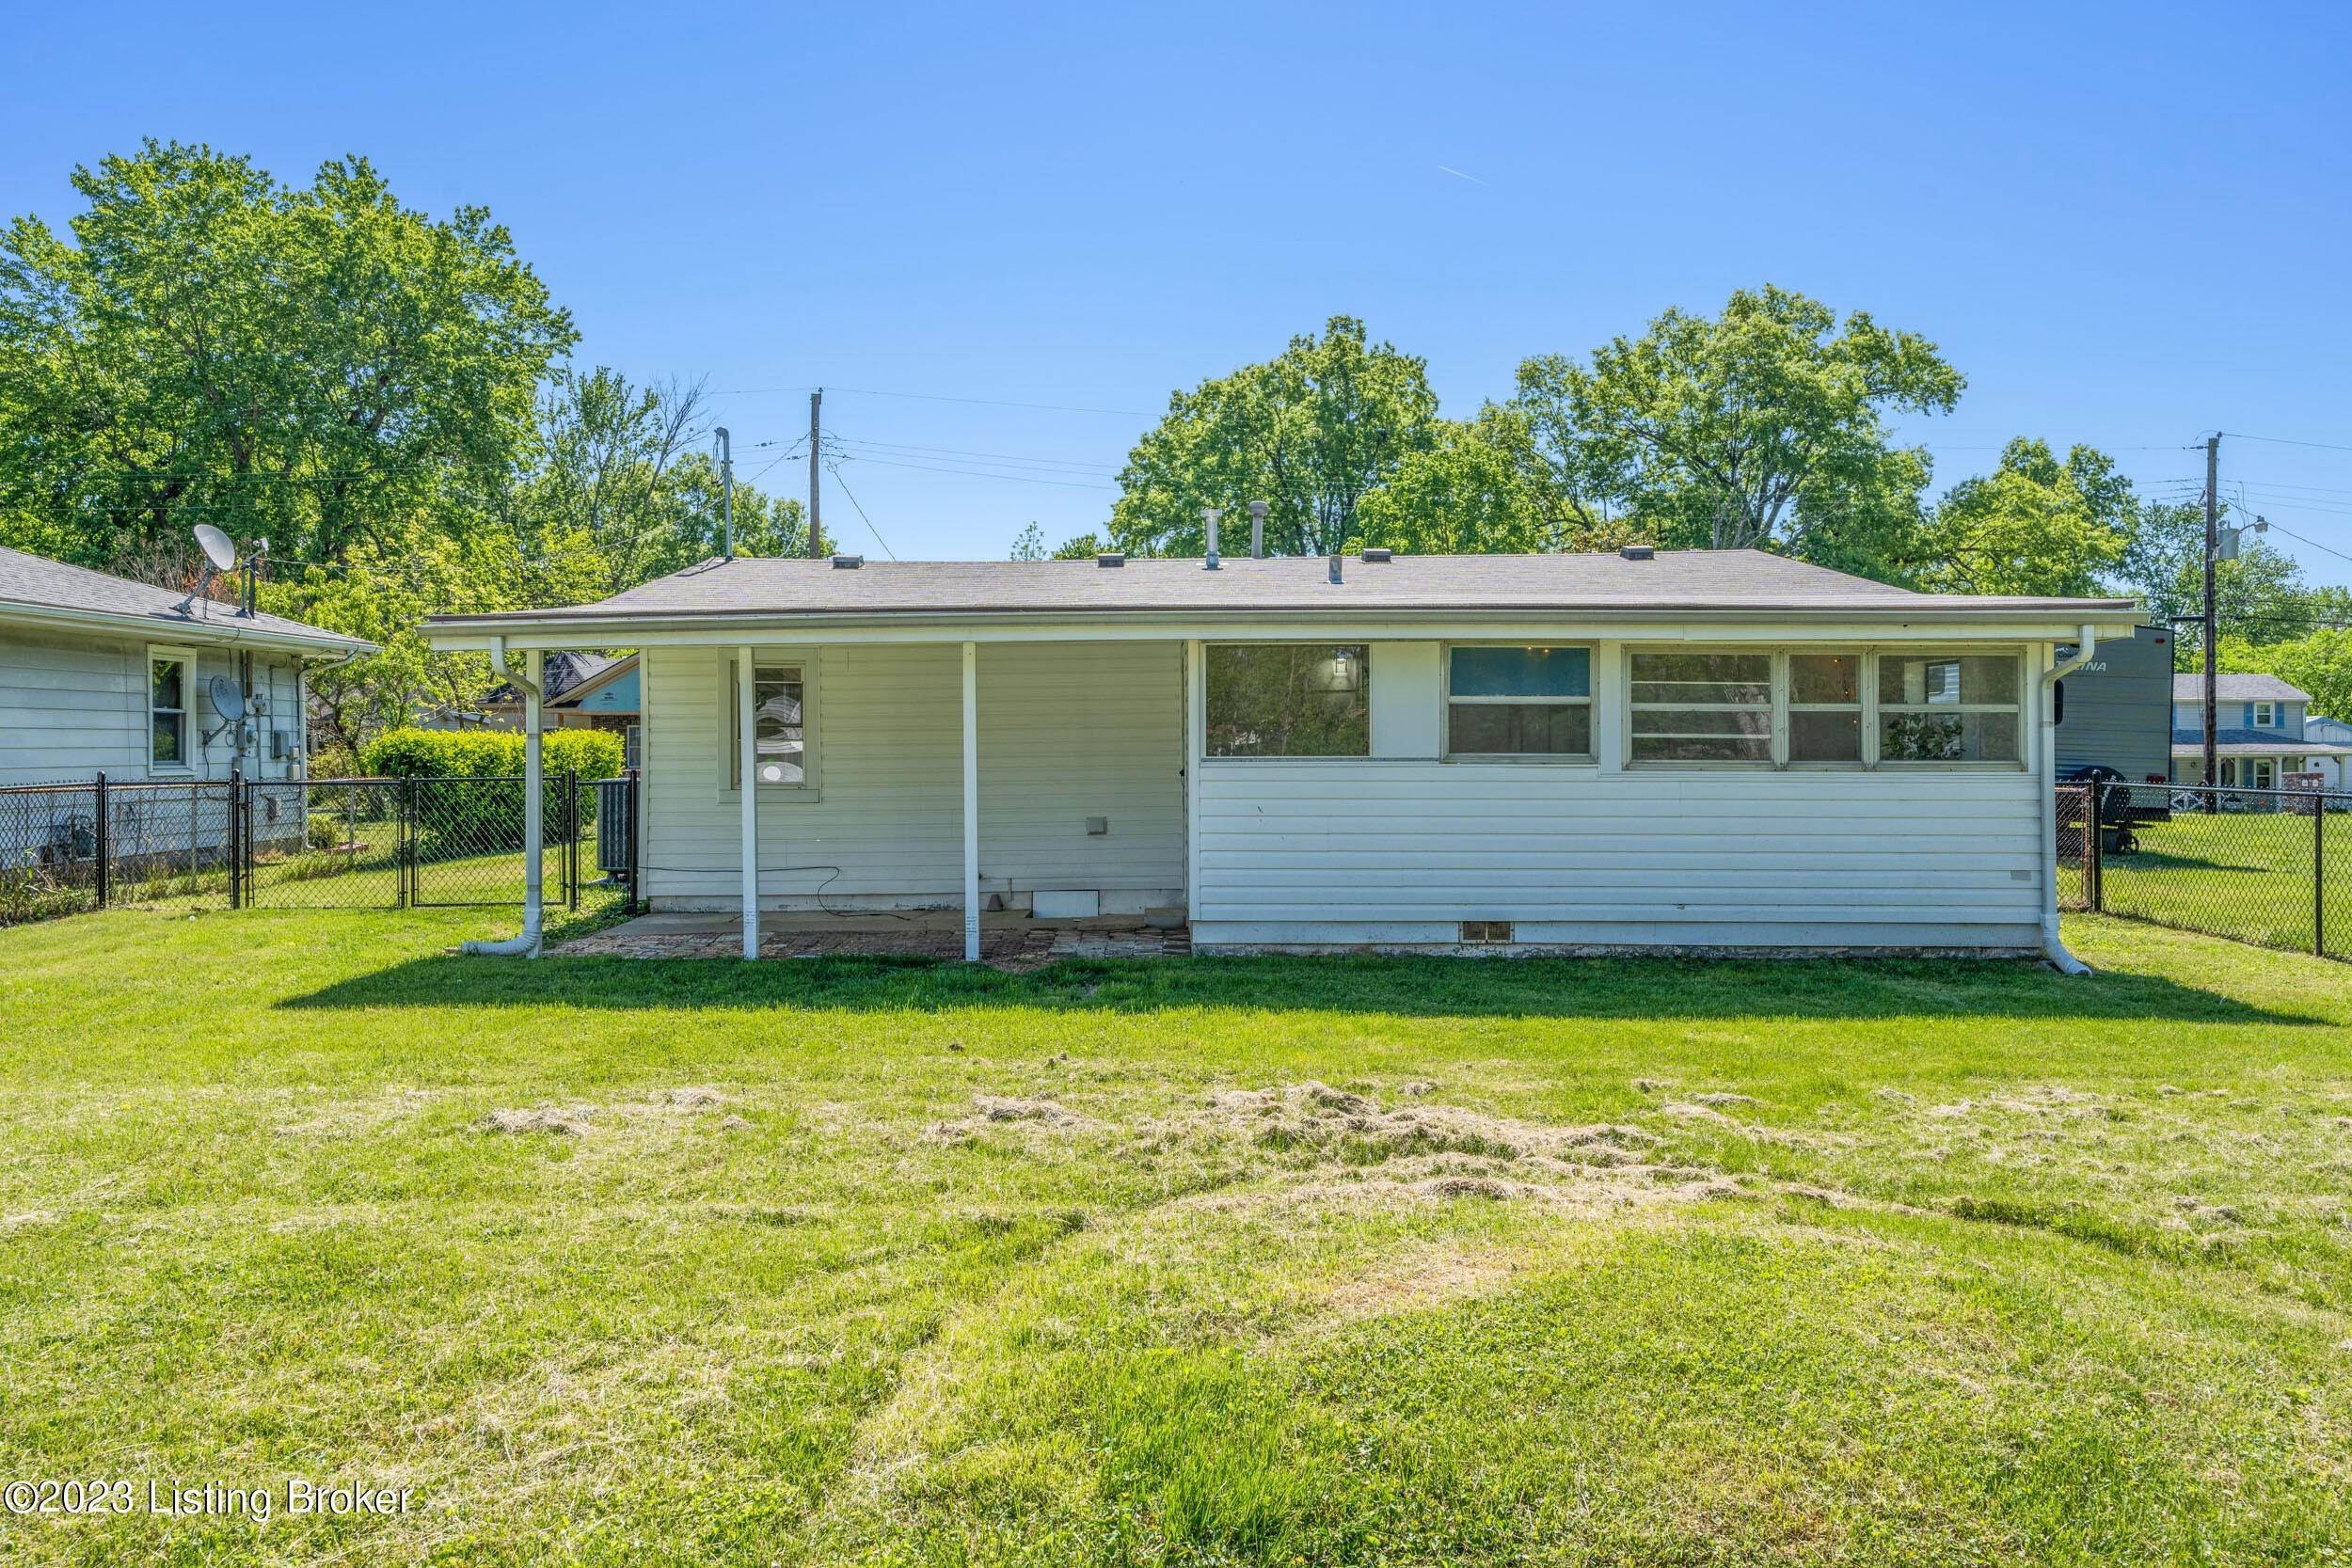 31. Single Family at Louisville, KY 40258